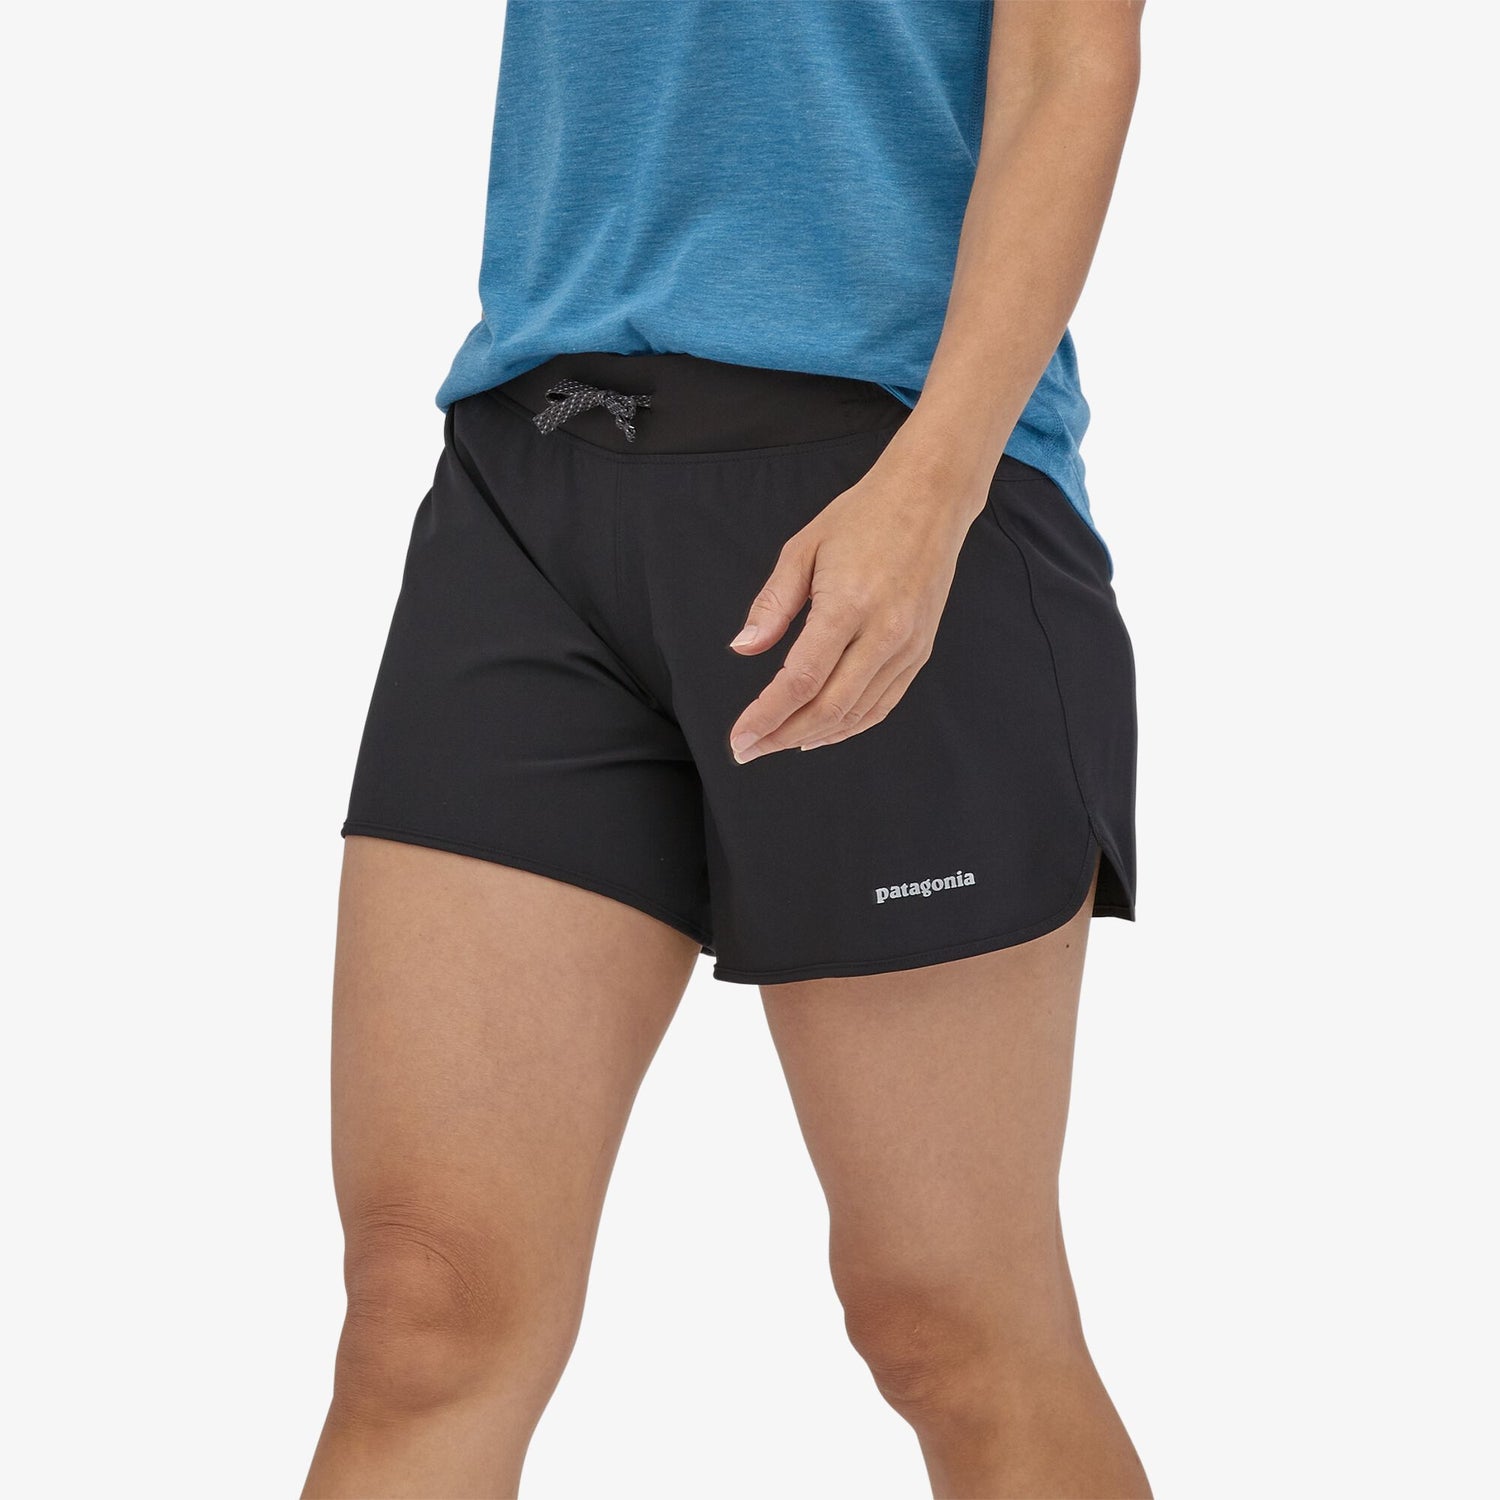 Patagonia - W's Nine Trails Shorts - 6 in. - Recycled Polyester - Weekendbee - sustainable sportswear